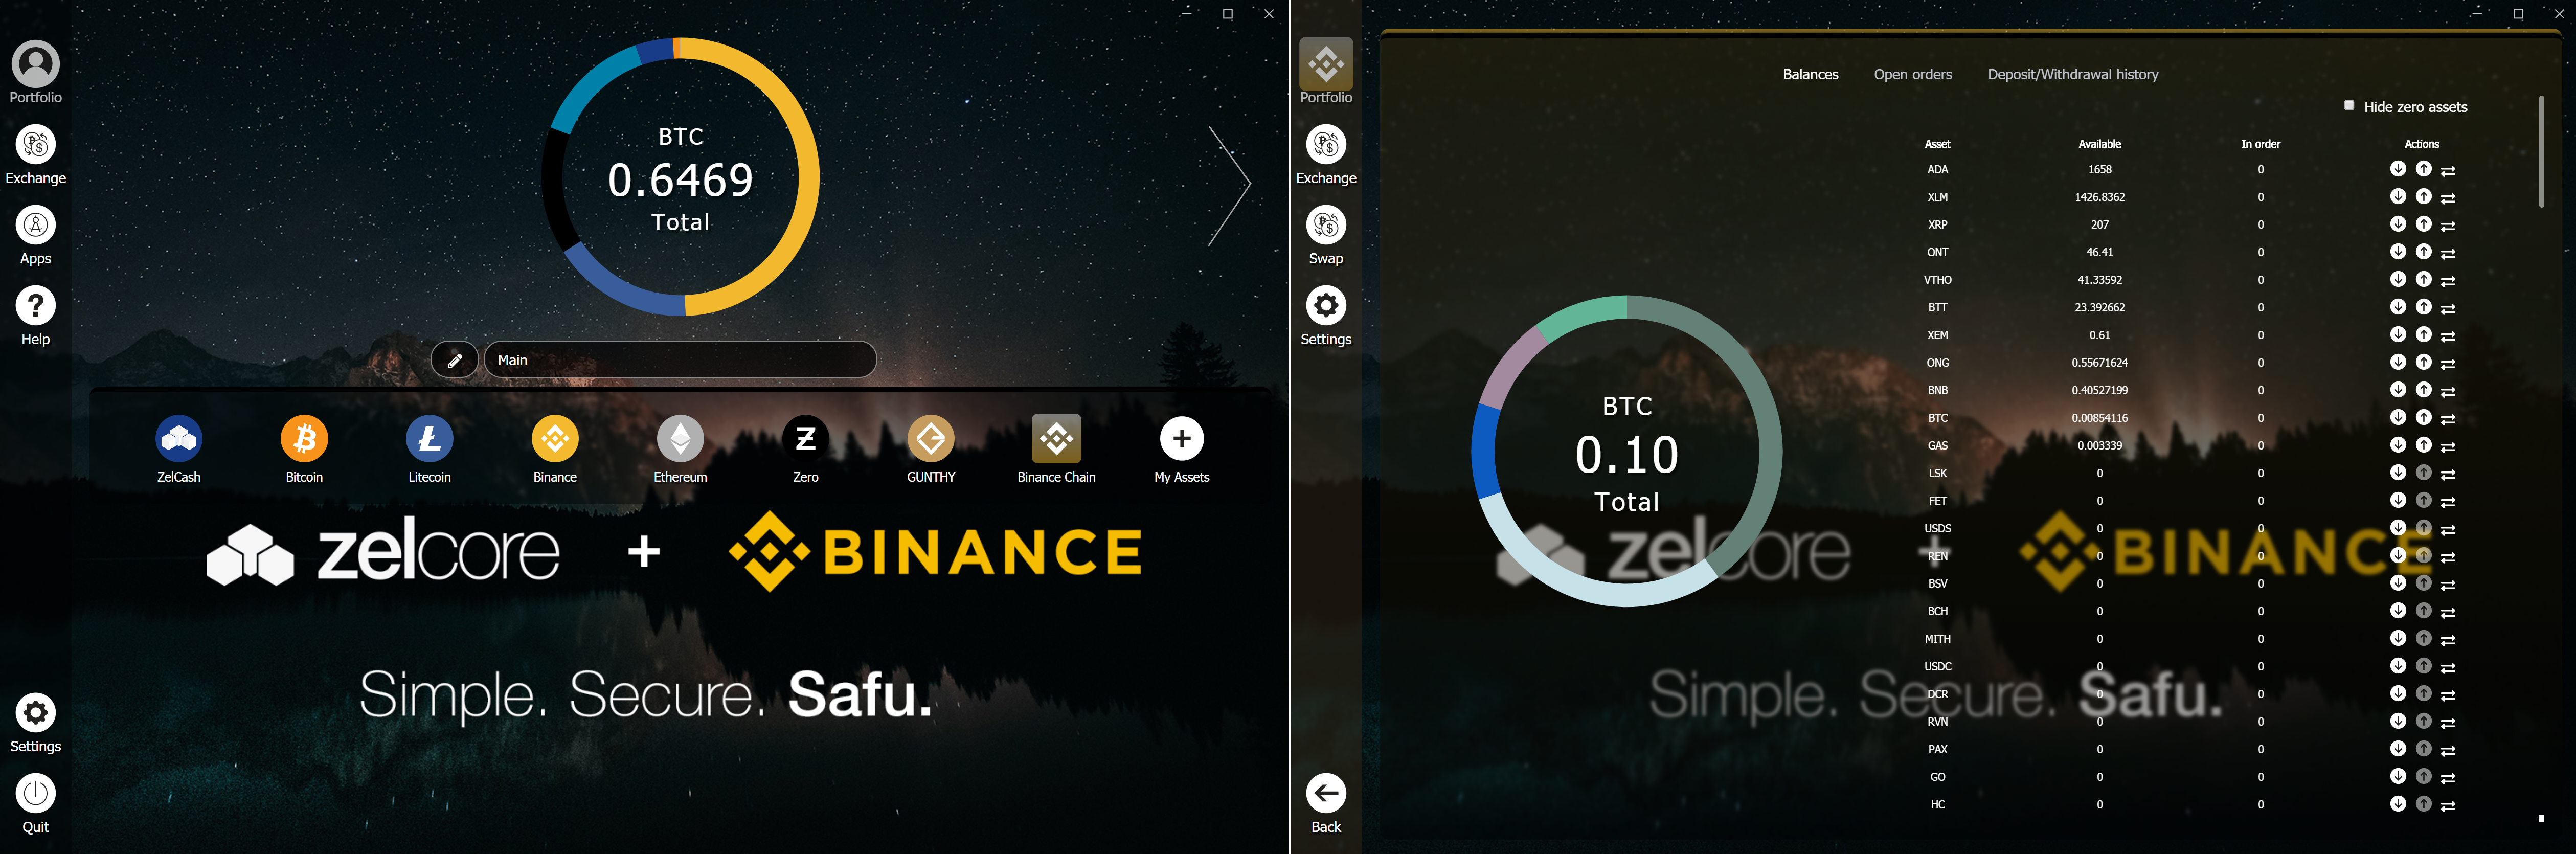 ZelCore Integrates Full Support for Binance DEX, Chain ...